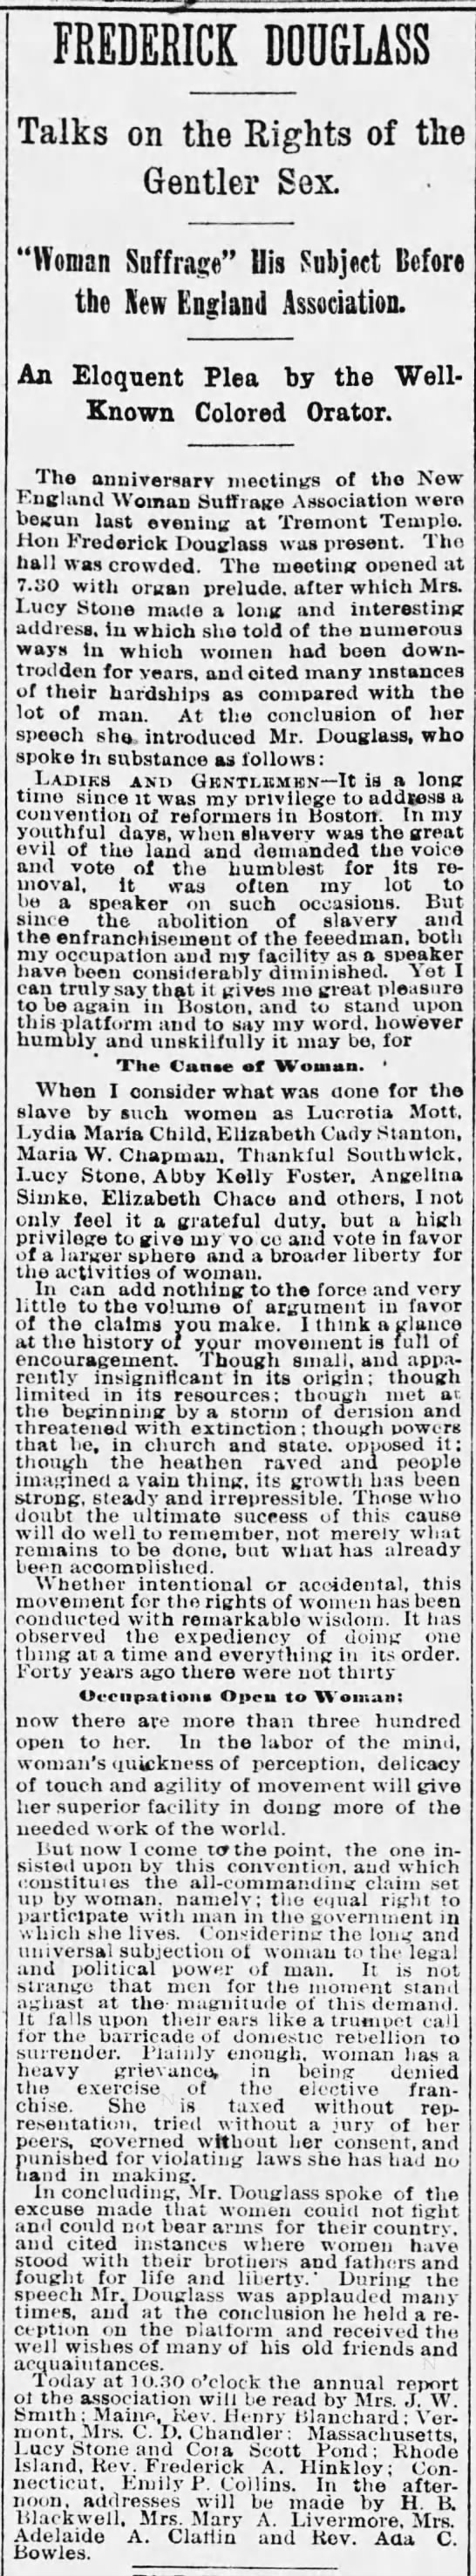 Frederick Douglass gives speech to New England Woman Suffrage Association in 1886 - 